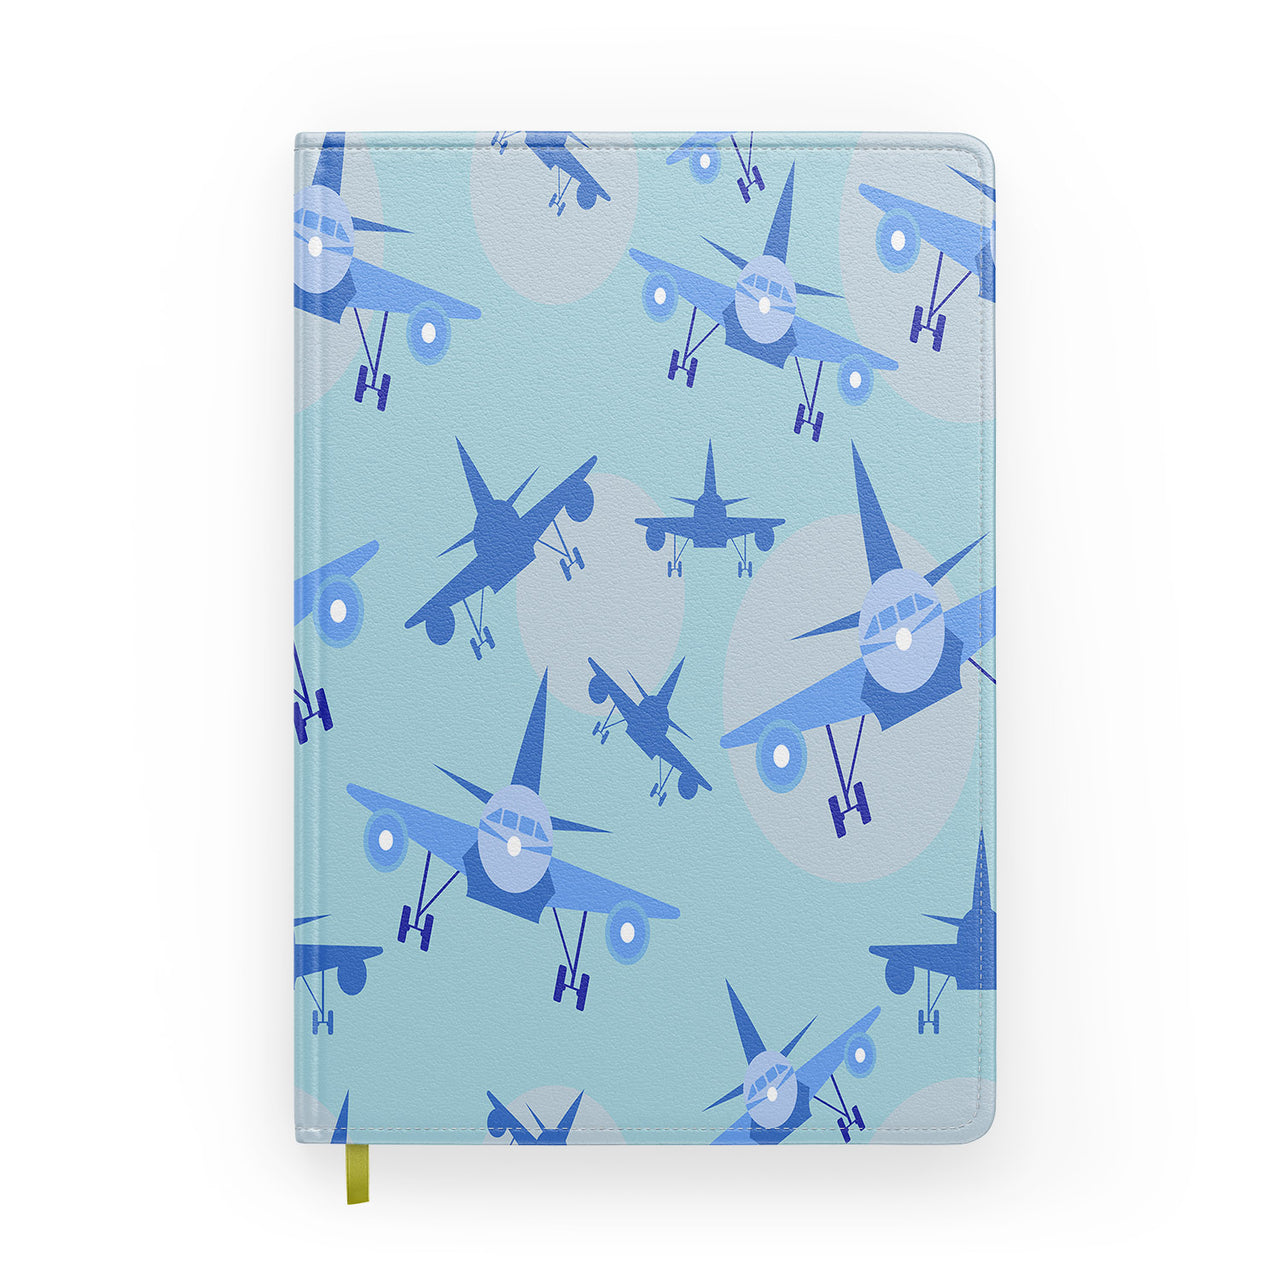 Super Funny Airplanes Designed Notebooks